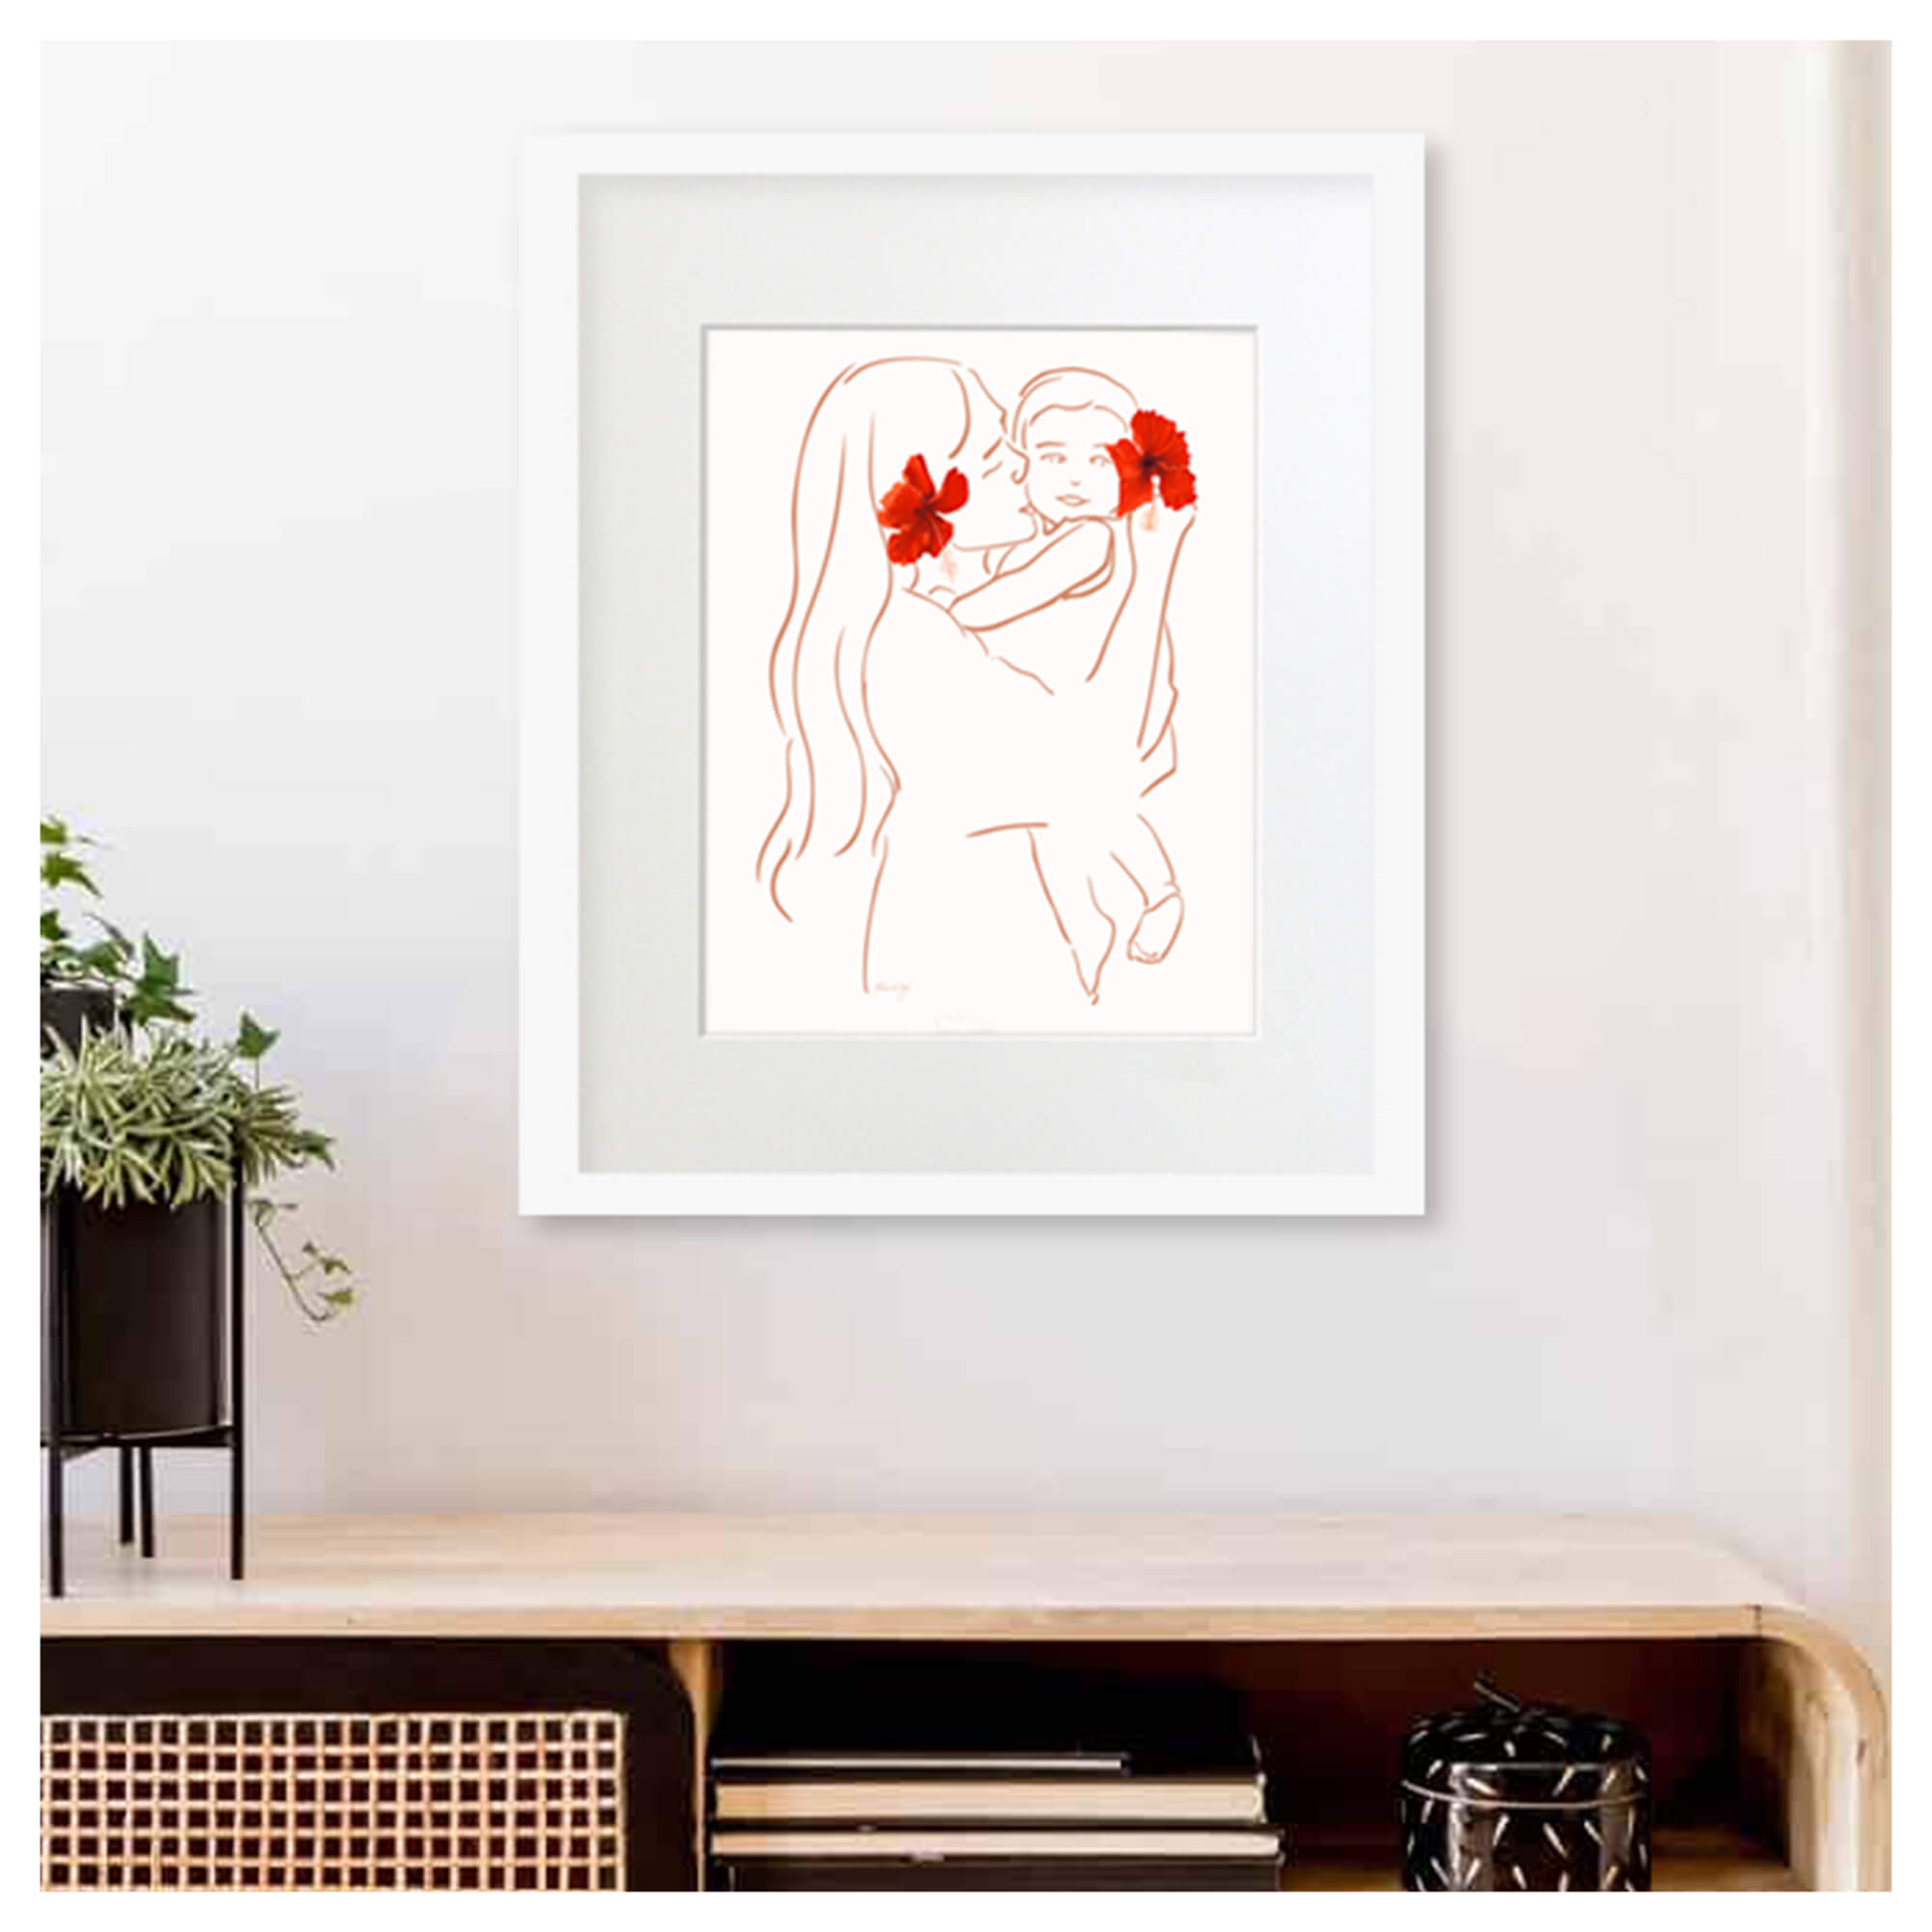 A framed matted art print of Matted art print featuring a mother holding her baby with vibrant red hibiscus flowers by Hawaii artist Aloha De Mele